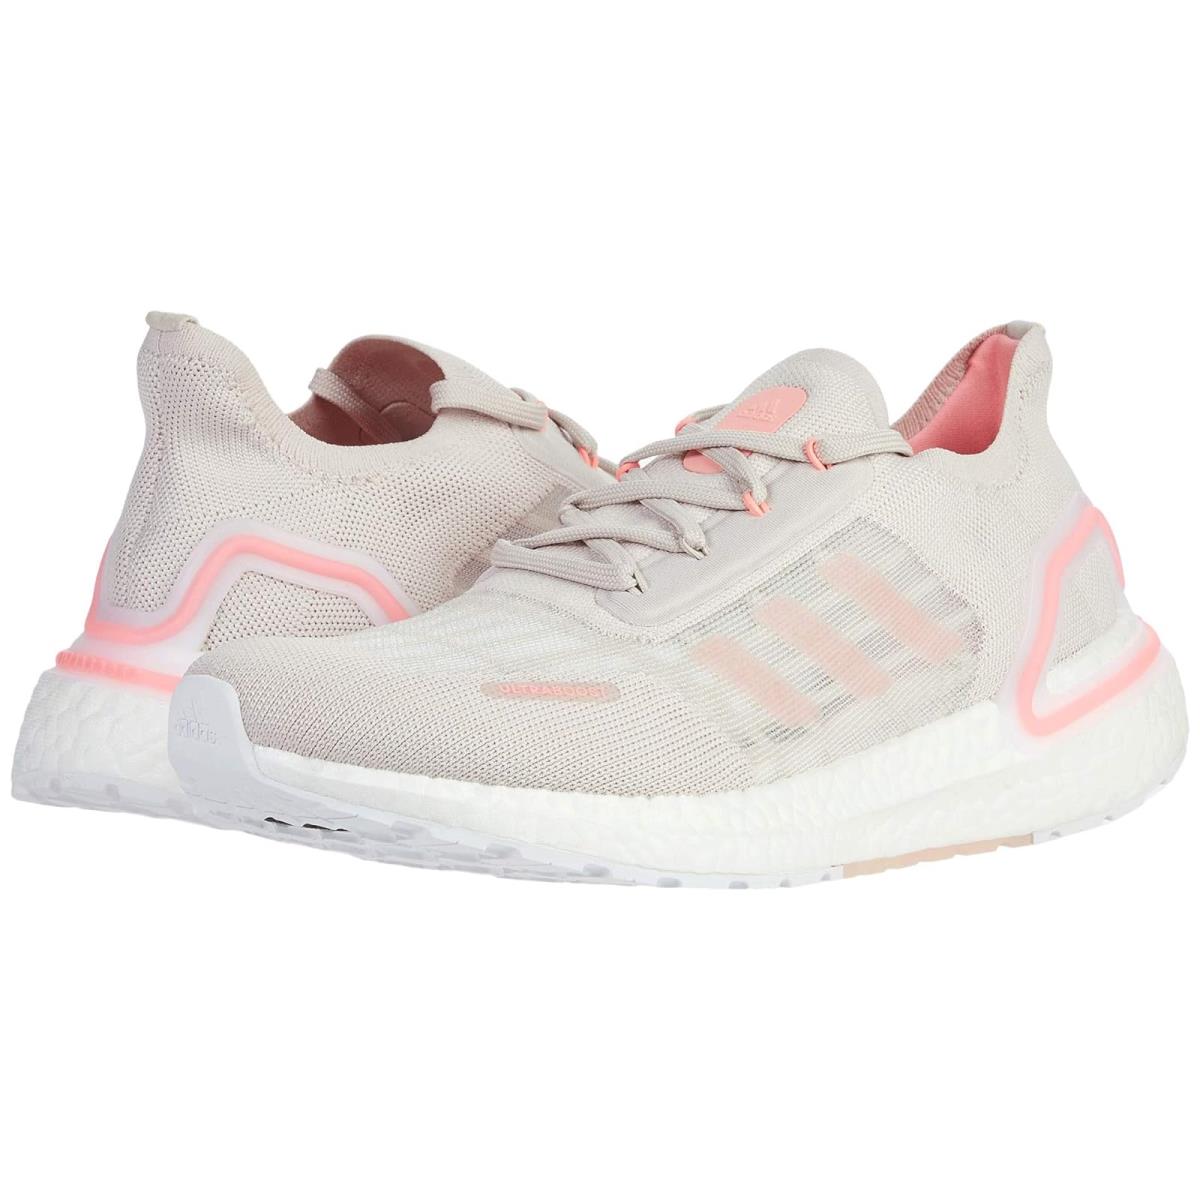 Woman`s Sneakers Athletic Shoes Adidas Running Ultraboost S.rdy Echo Pink/Light Flash Red/Footwear White